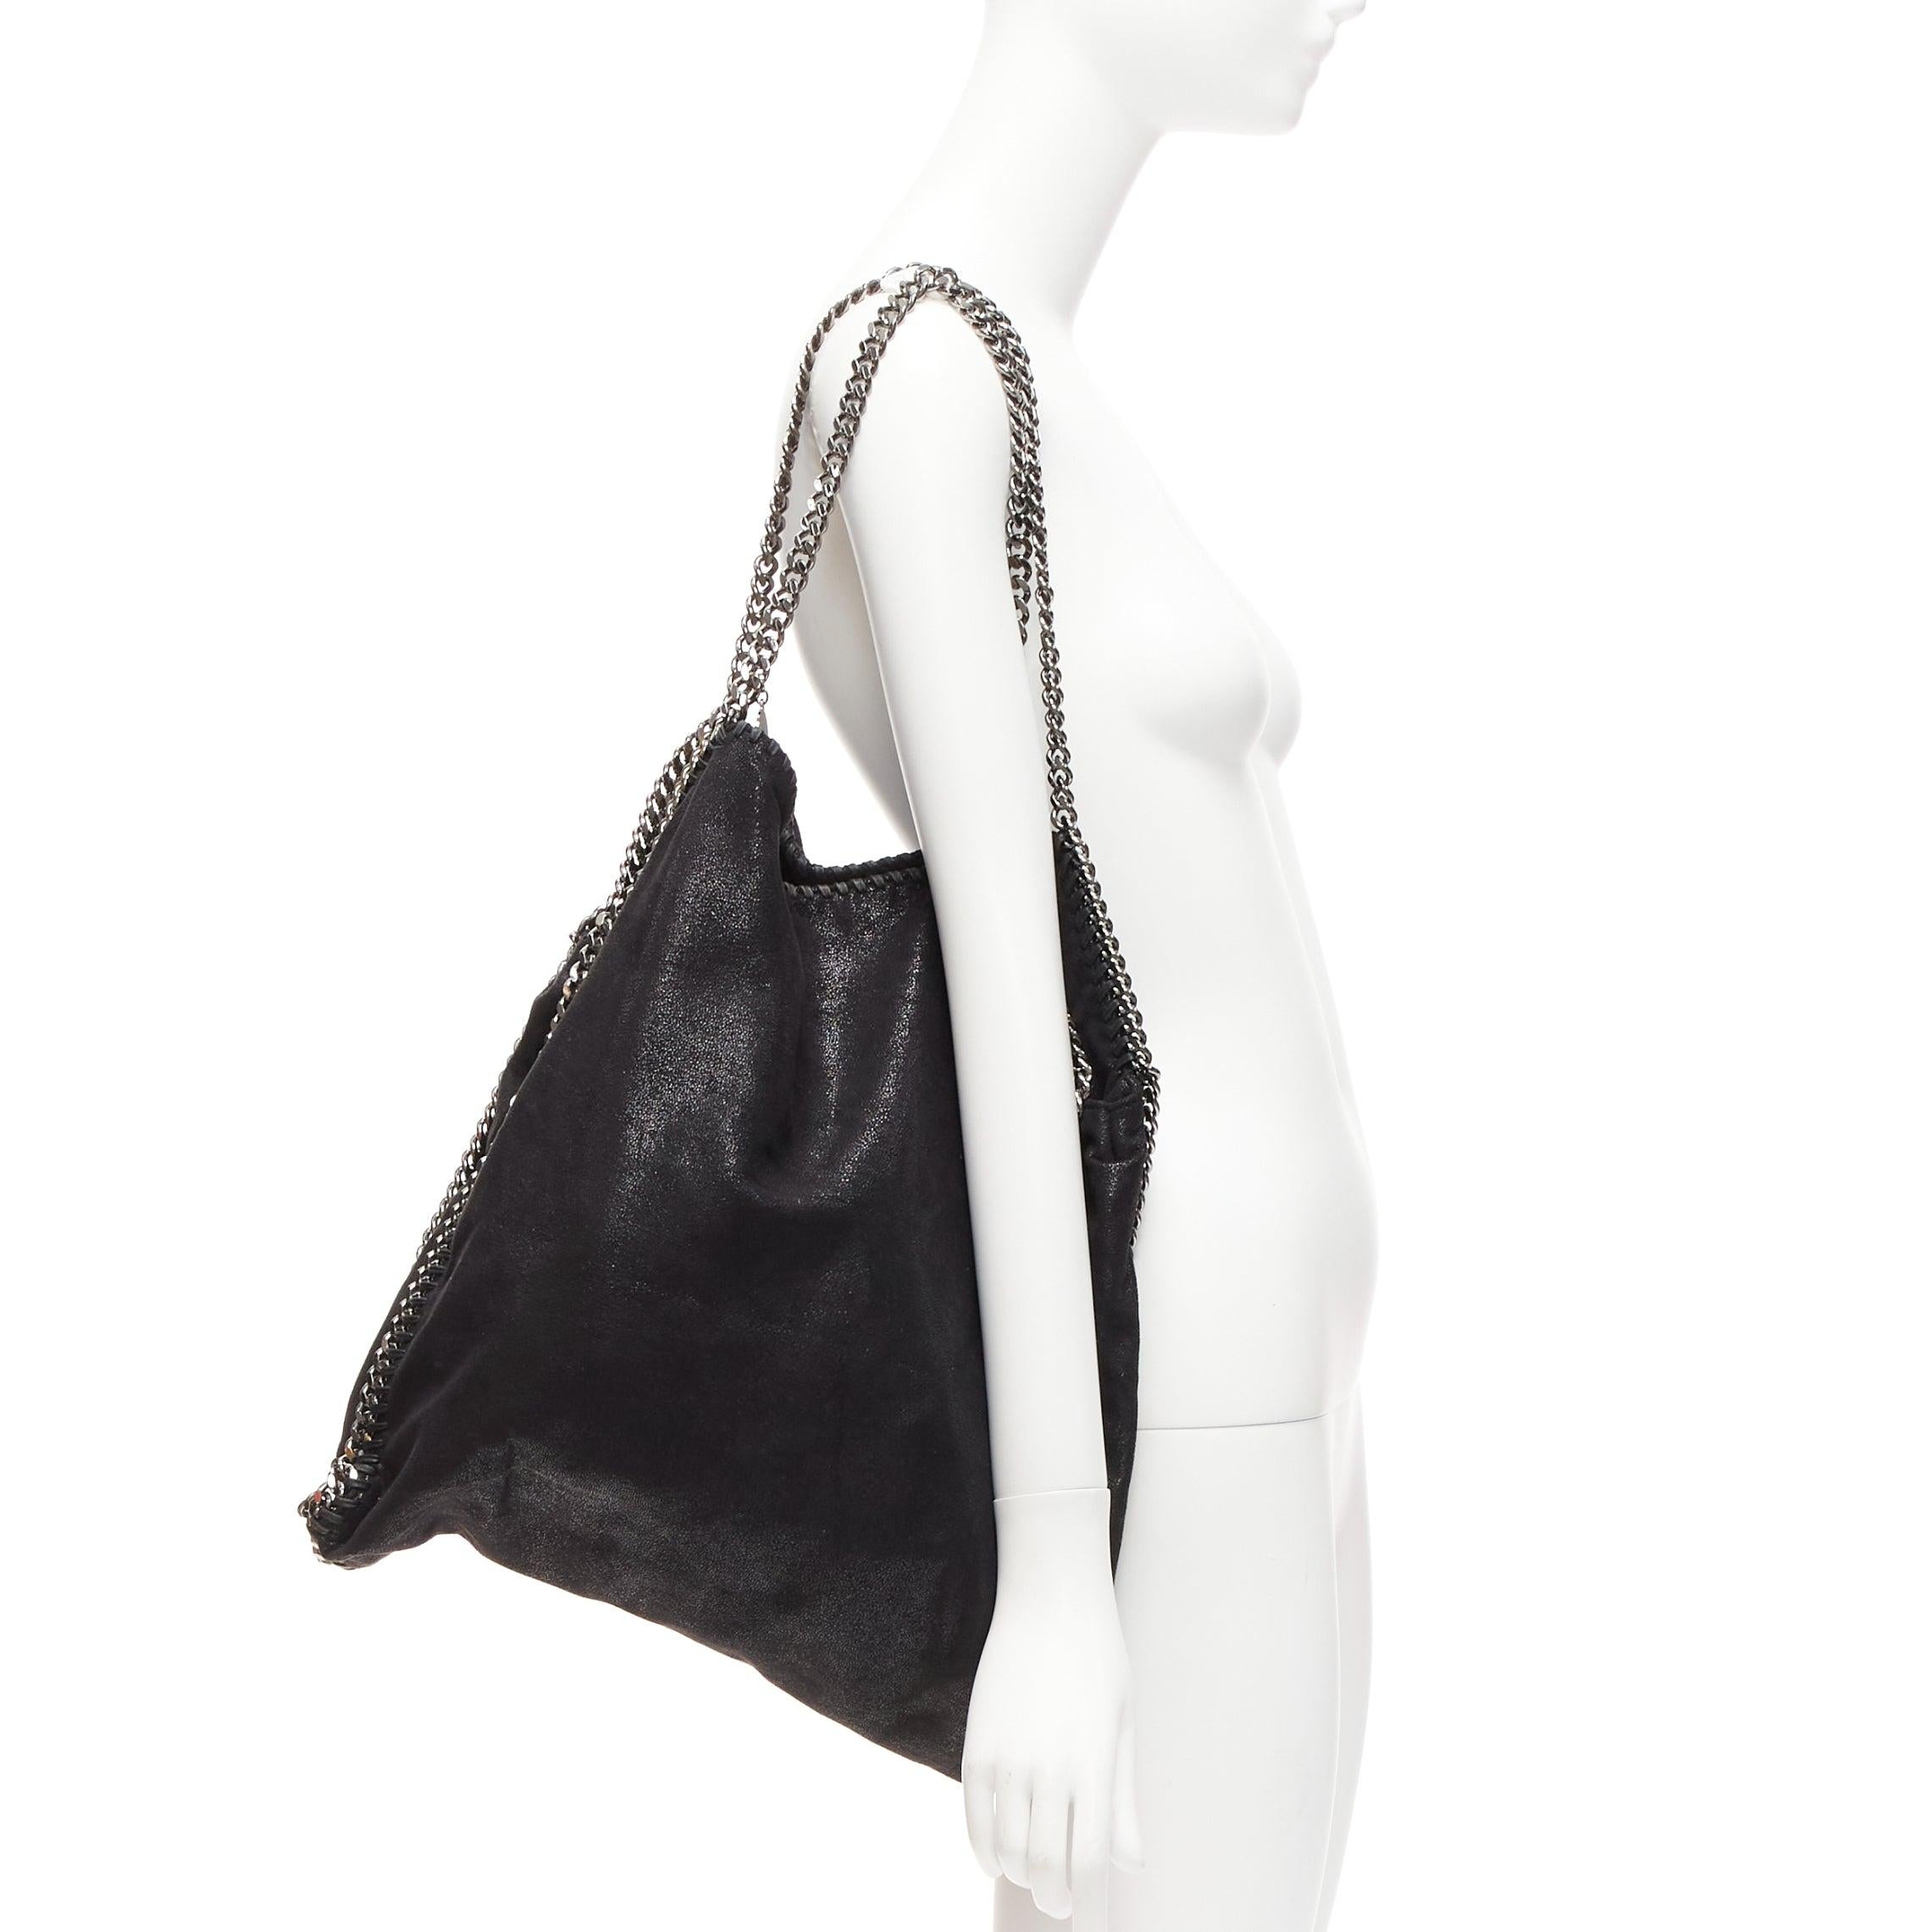 STELLA MCCARTNEY Falabella black shiny fabric logo medium chain tote bag
Reference: CELG/A00403
Brand: Stella McCartney
Designer: Stella McCartney
Model: Falabella
Material: Fabric
Color: Black, Silver
Pattern: Solid
Lining: Beige Fabric
Extra